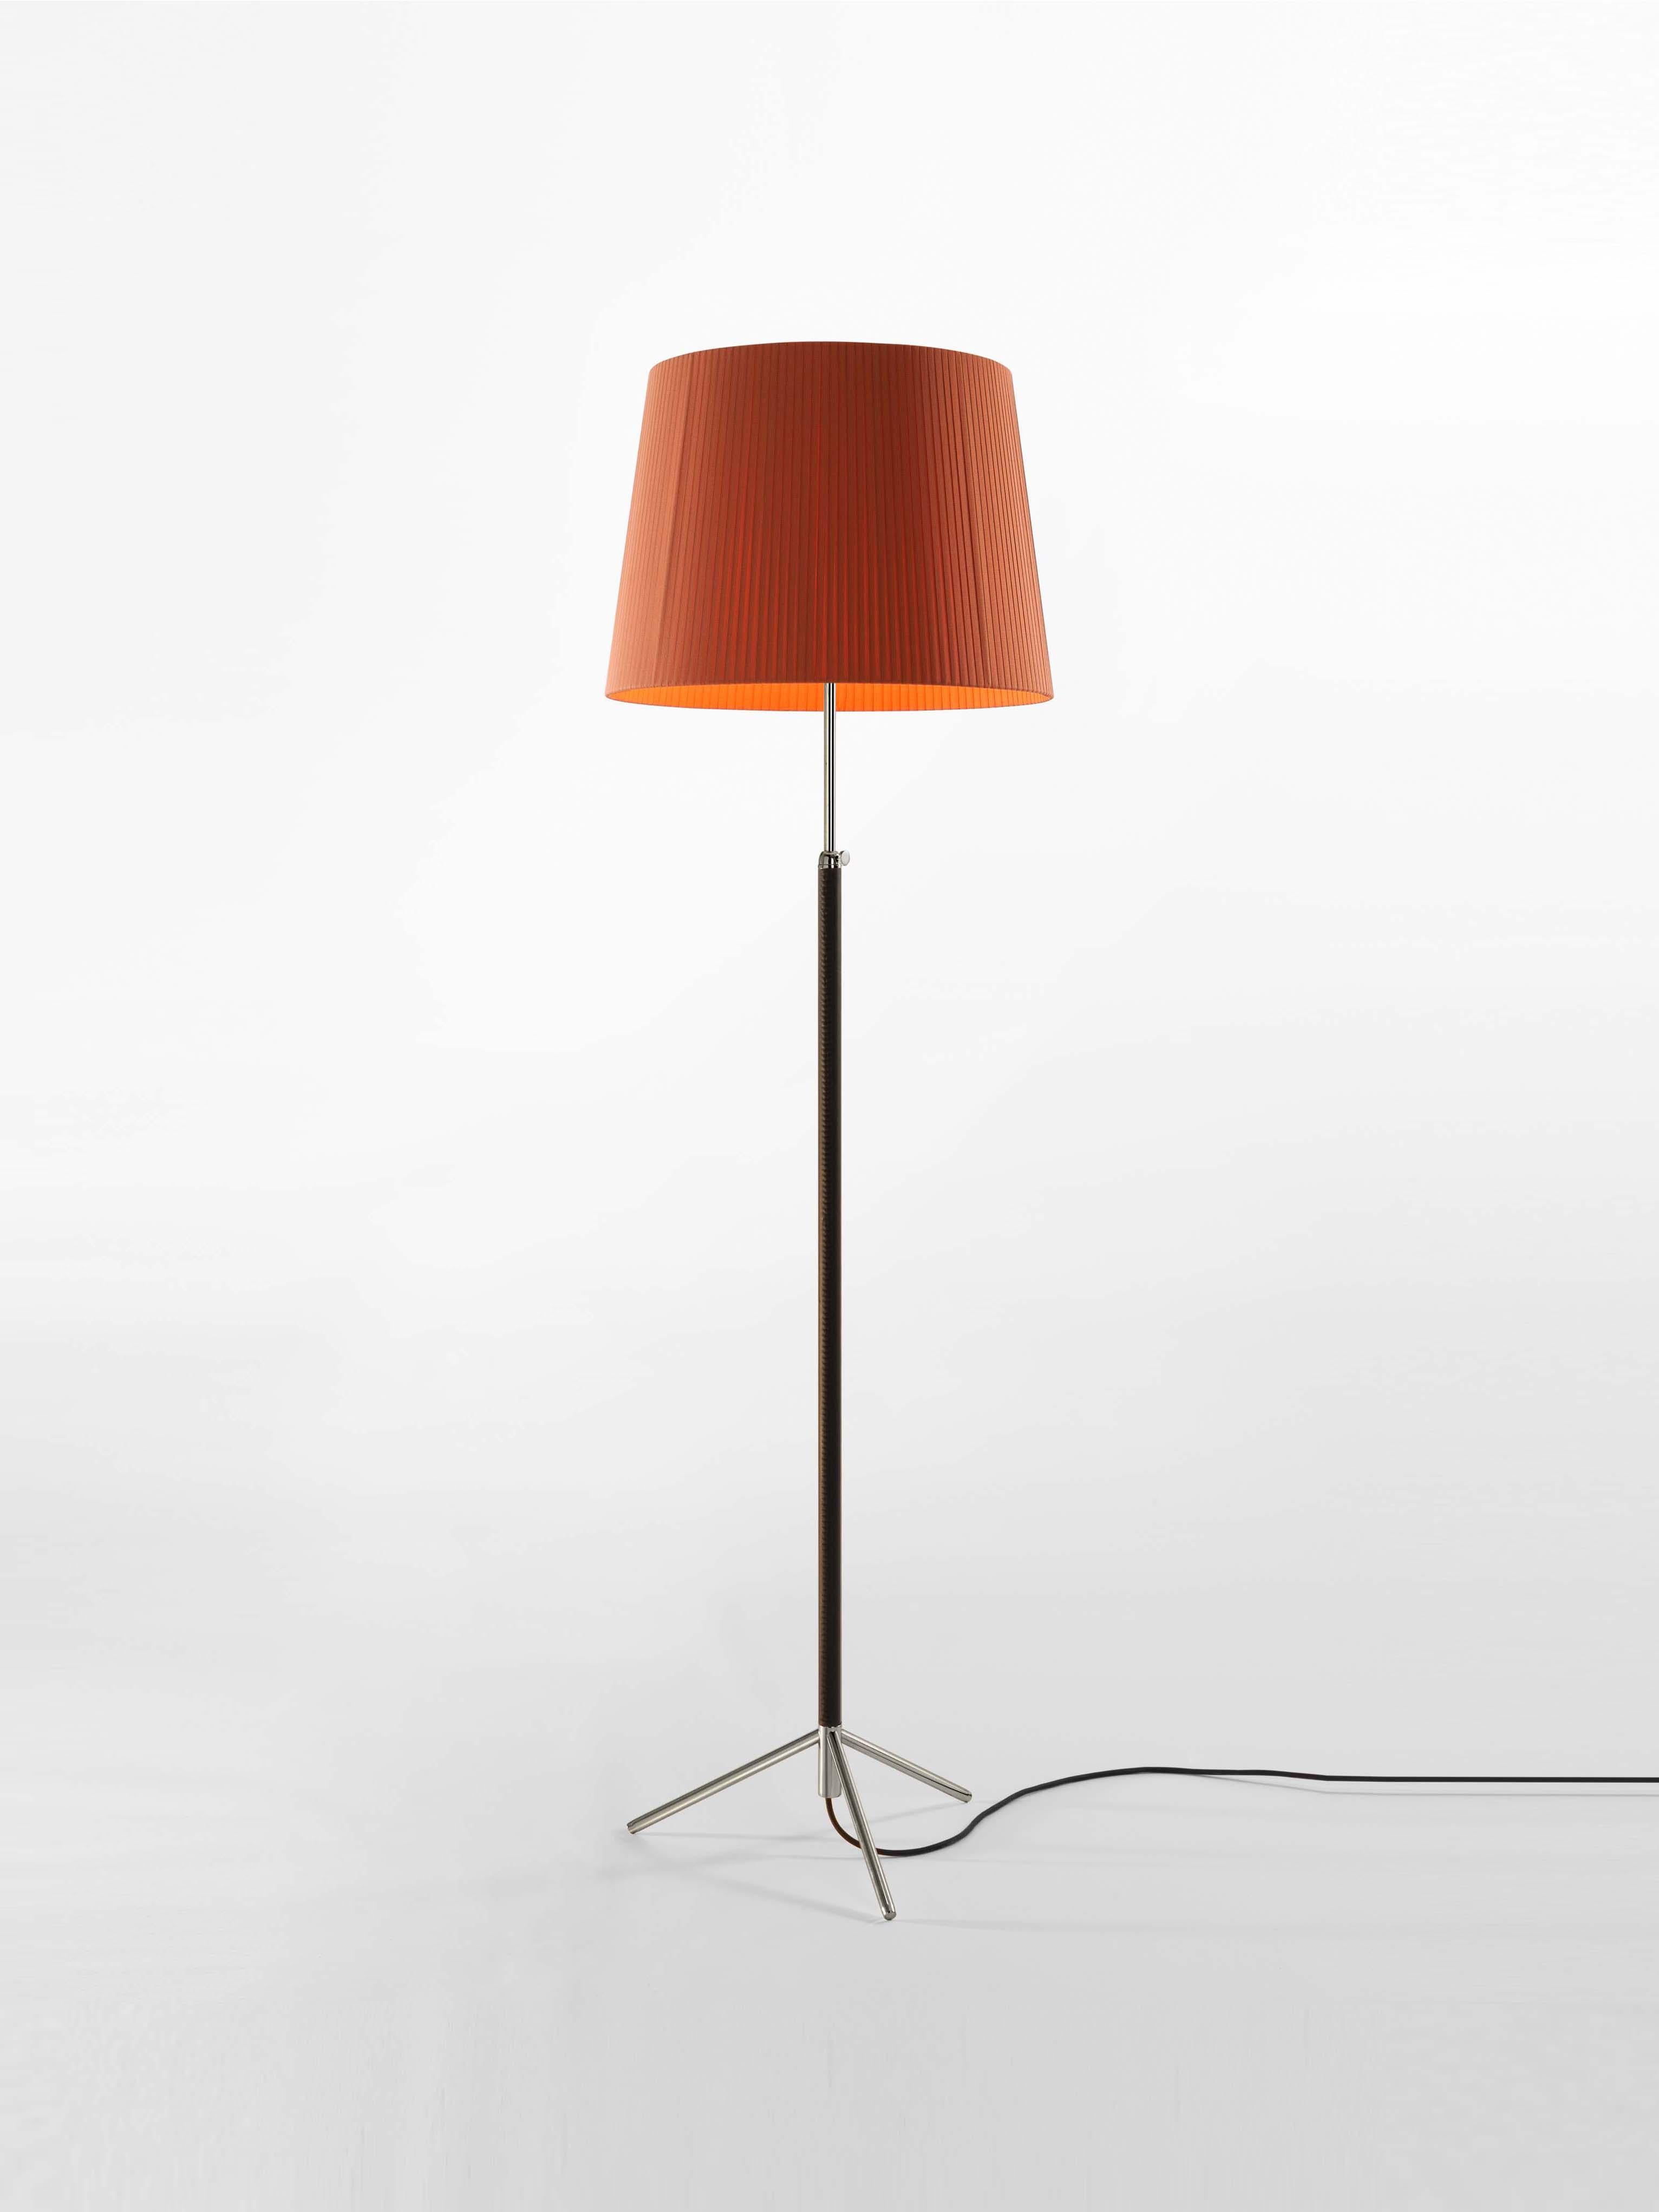 Terracotta and Chrome Pie de Salón G1 floor lamp by Jaume Sans
Dimensions: D 45 x H 120-160 cm
Materials: Metal, leather, ribbon.
Available in chrome-plated or polished brass structure.
Available in other shade colors and sizes.

This slender